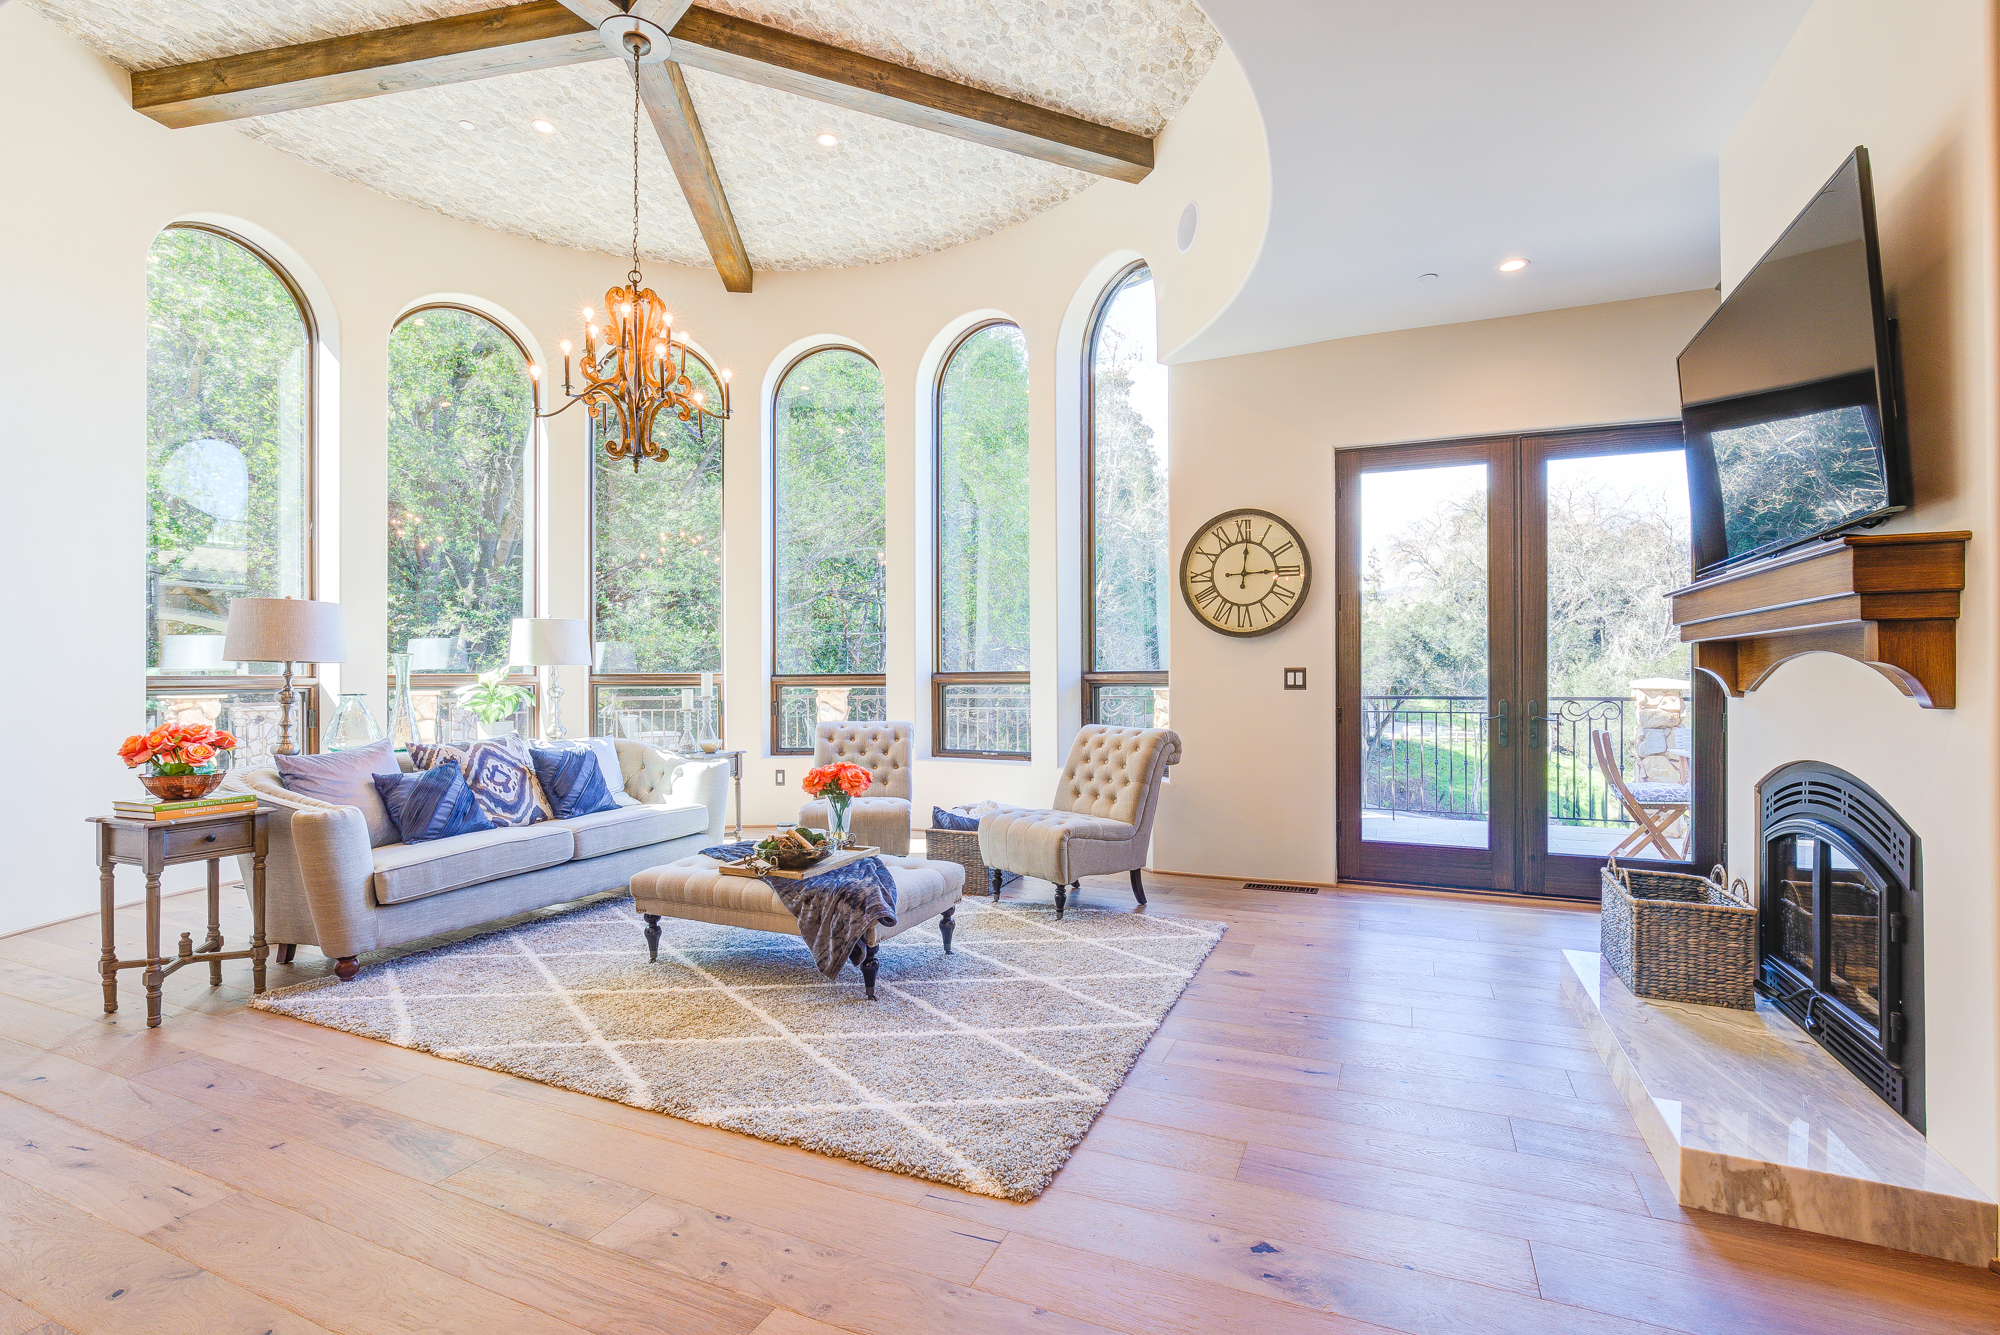  Six majestic 11 foot tall arched windows cast cheerful daylight into the enormous family room 